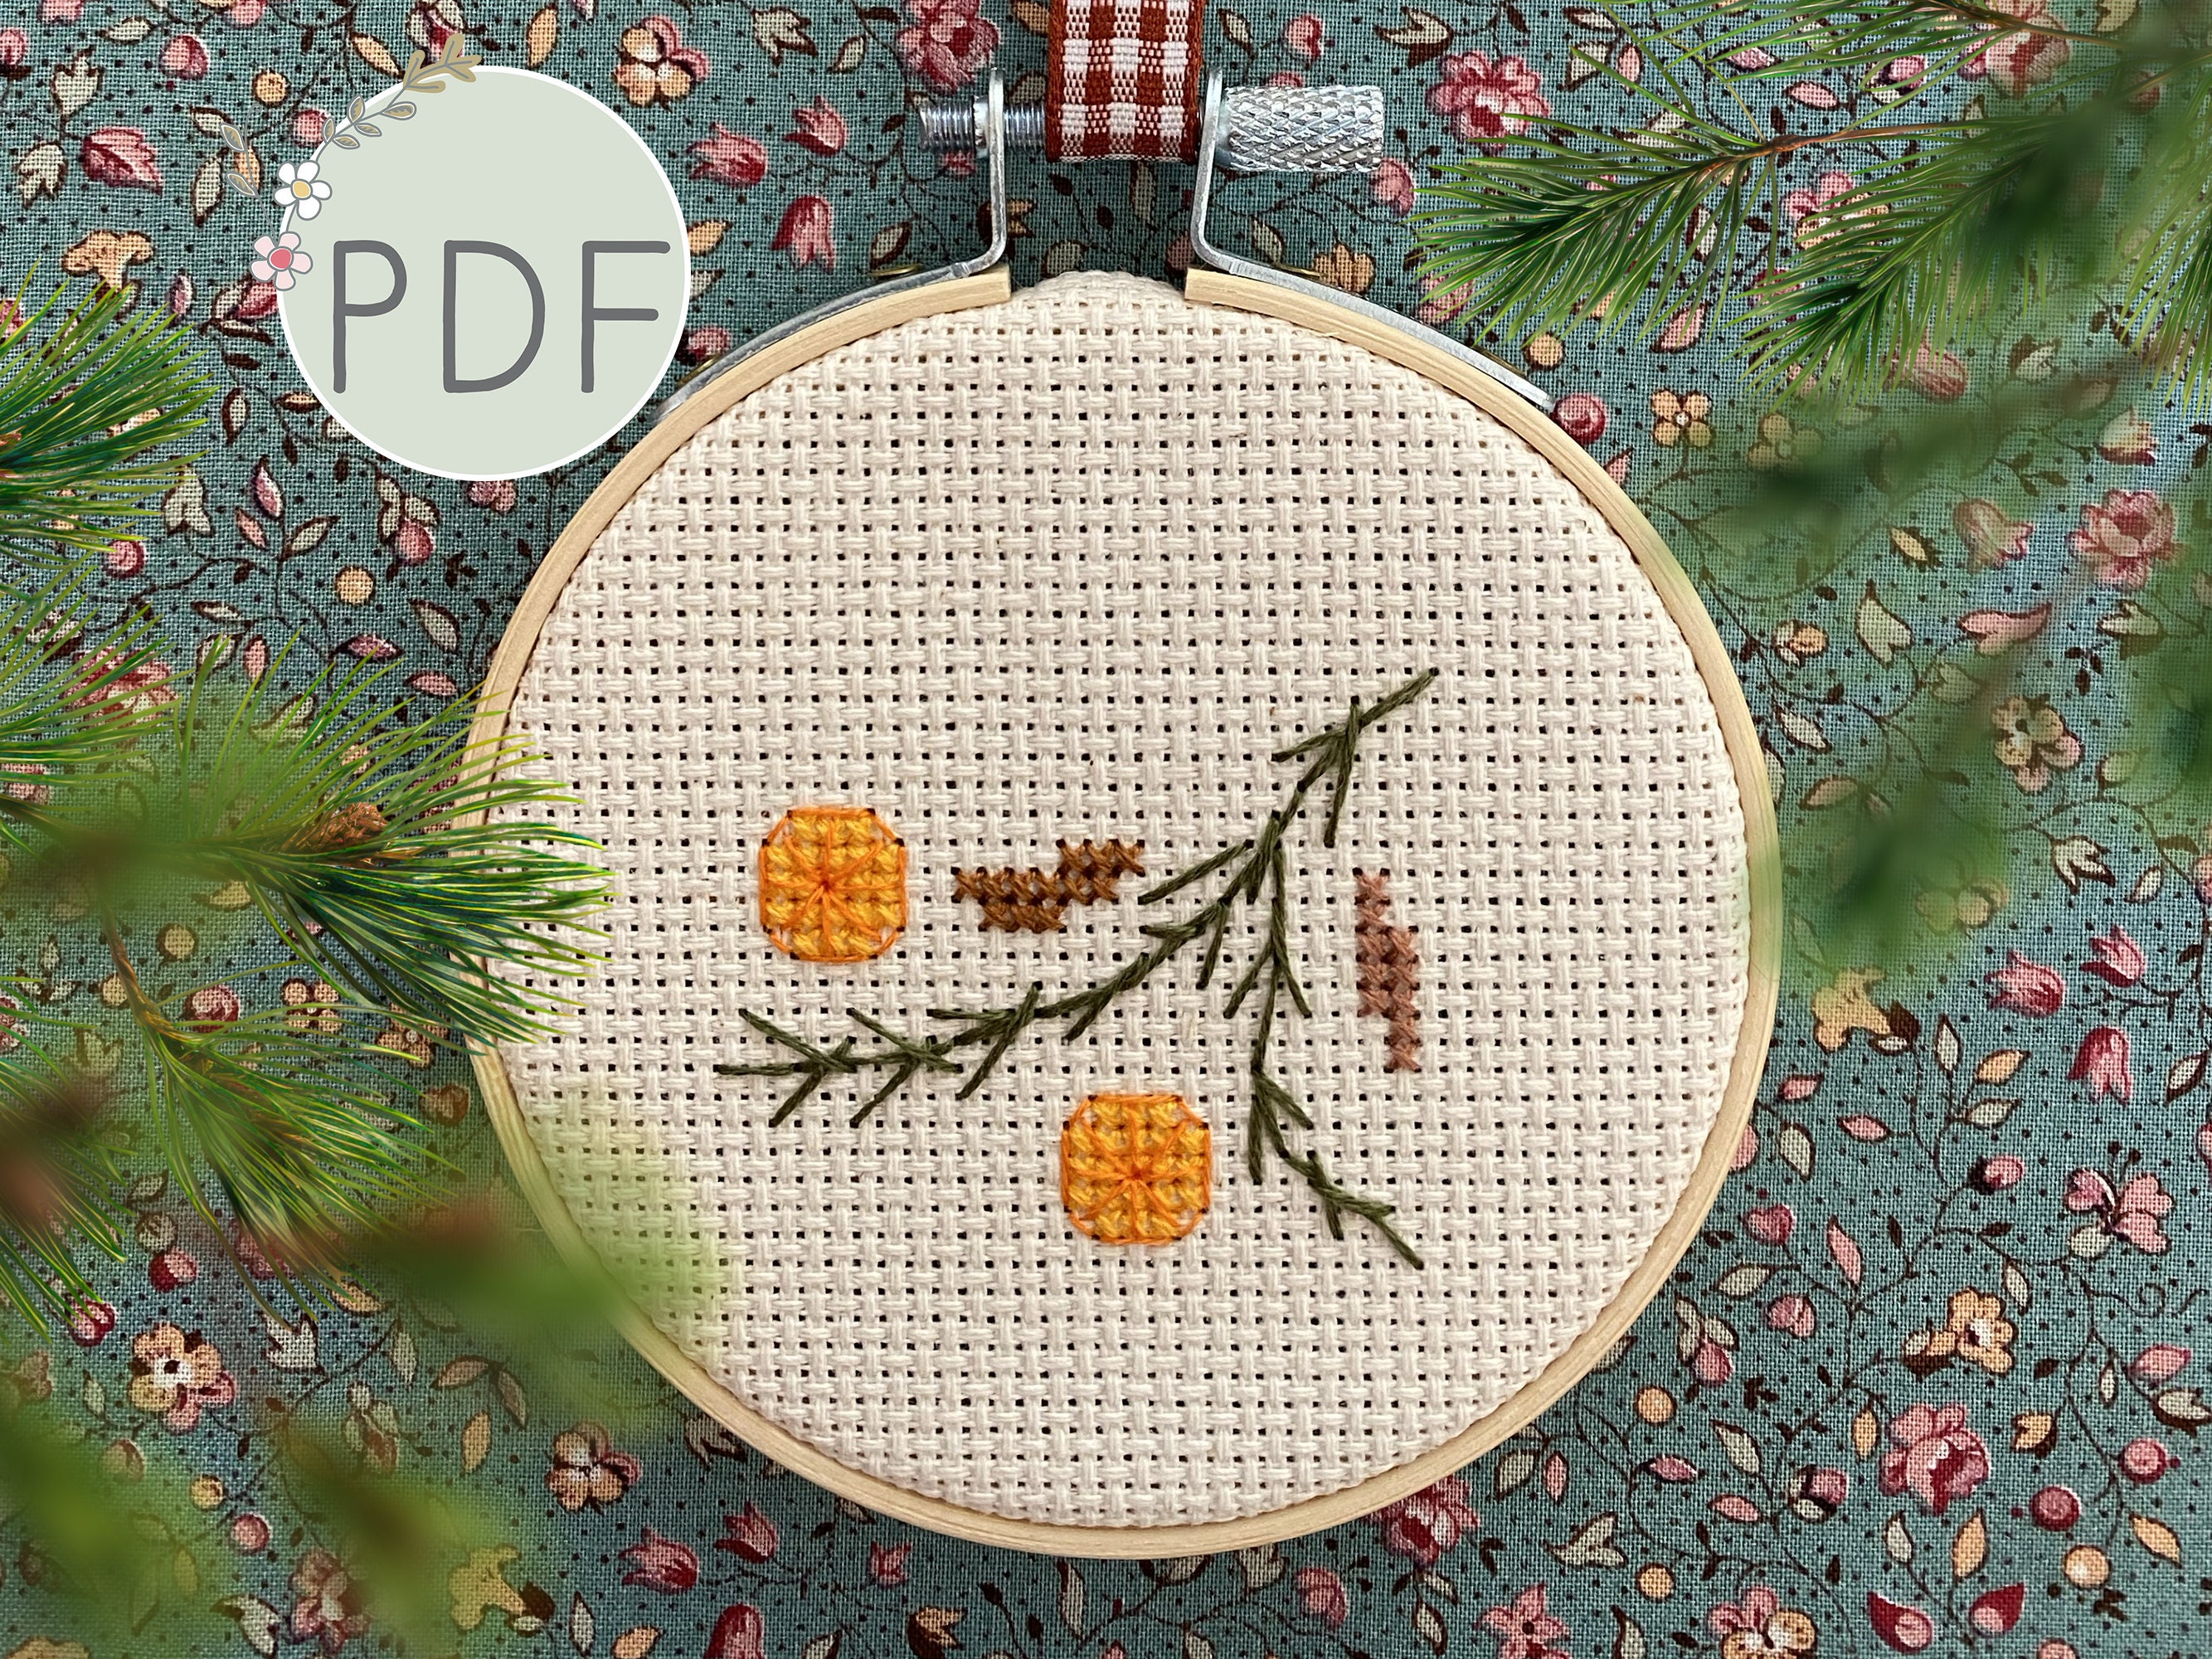 Things of Autumn Cross Stitch Sampler Pattern  Posie: Patterns and Kits to  Stitch by Alicia Paulson